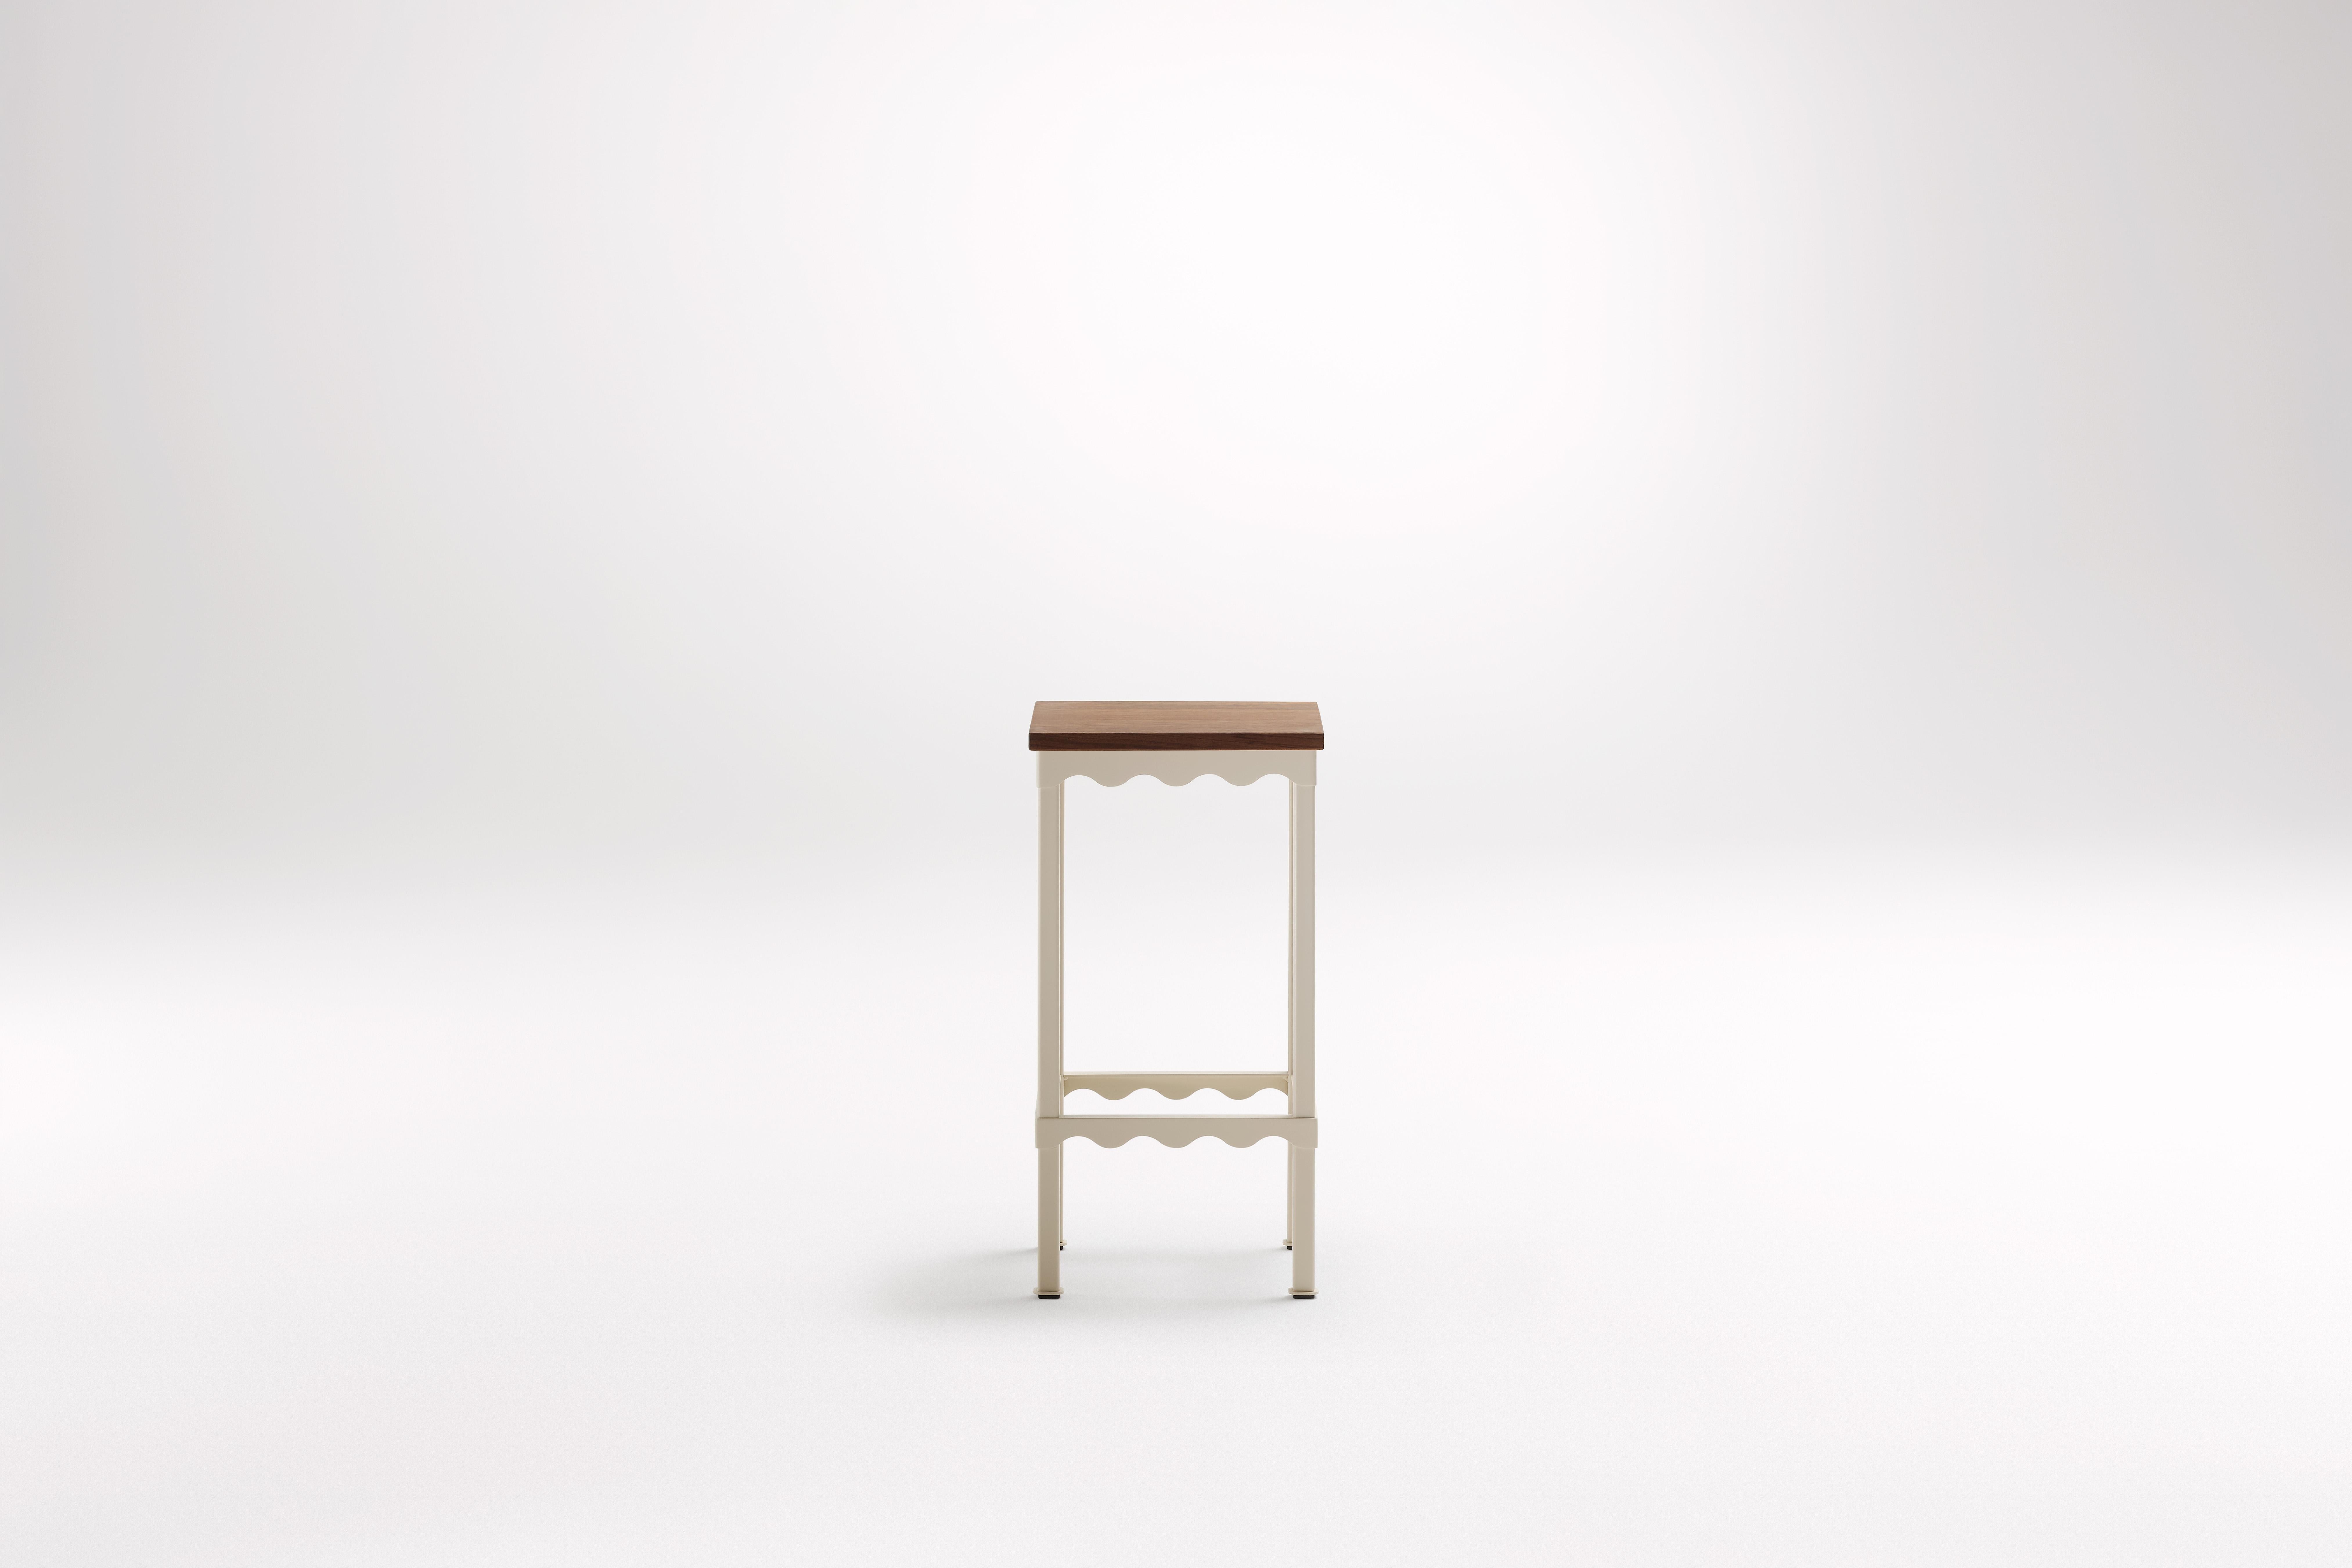 Wood Bellini High Stool by Coco Flip
Dimensions: D 34 x W 34 x H 65/75 cm
Materials: Wood, Powder-coated steel frame. 
Weight: 8kg
Frame Finishes: Textura Paperbark.

Coco Flip is a Melbourne based furniture and lighting design studio, run by us,